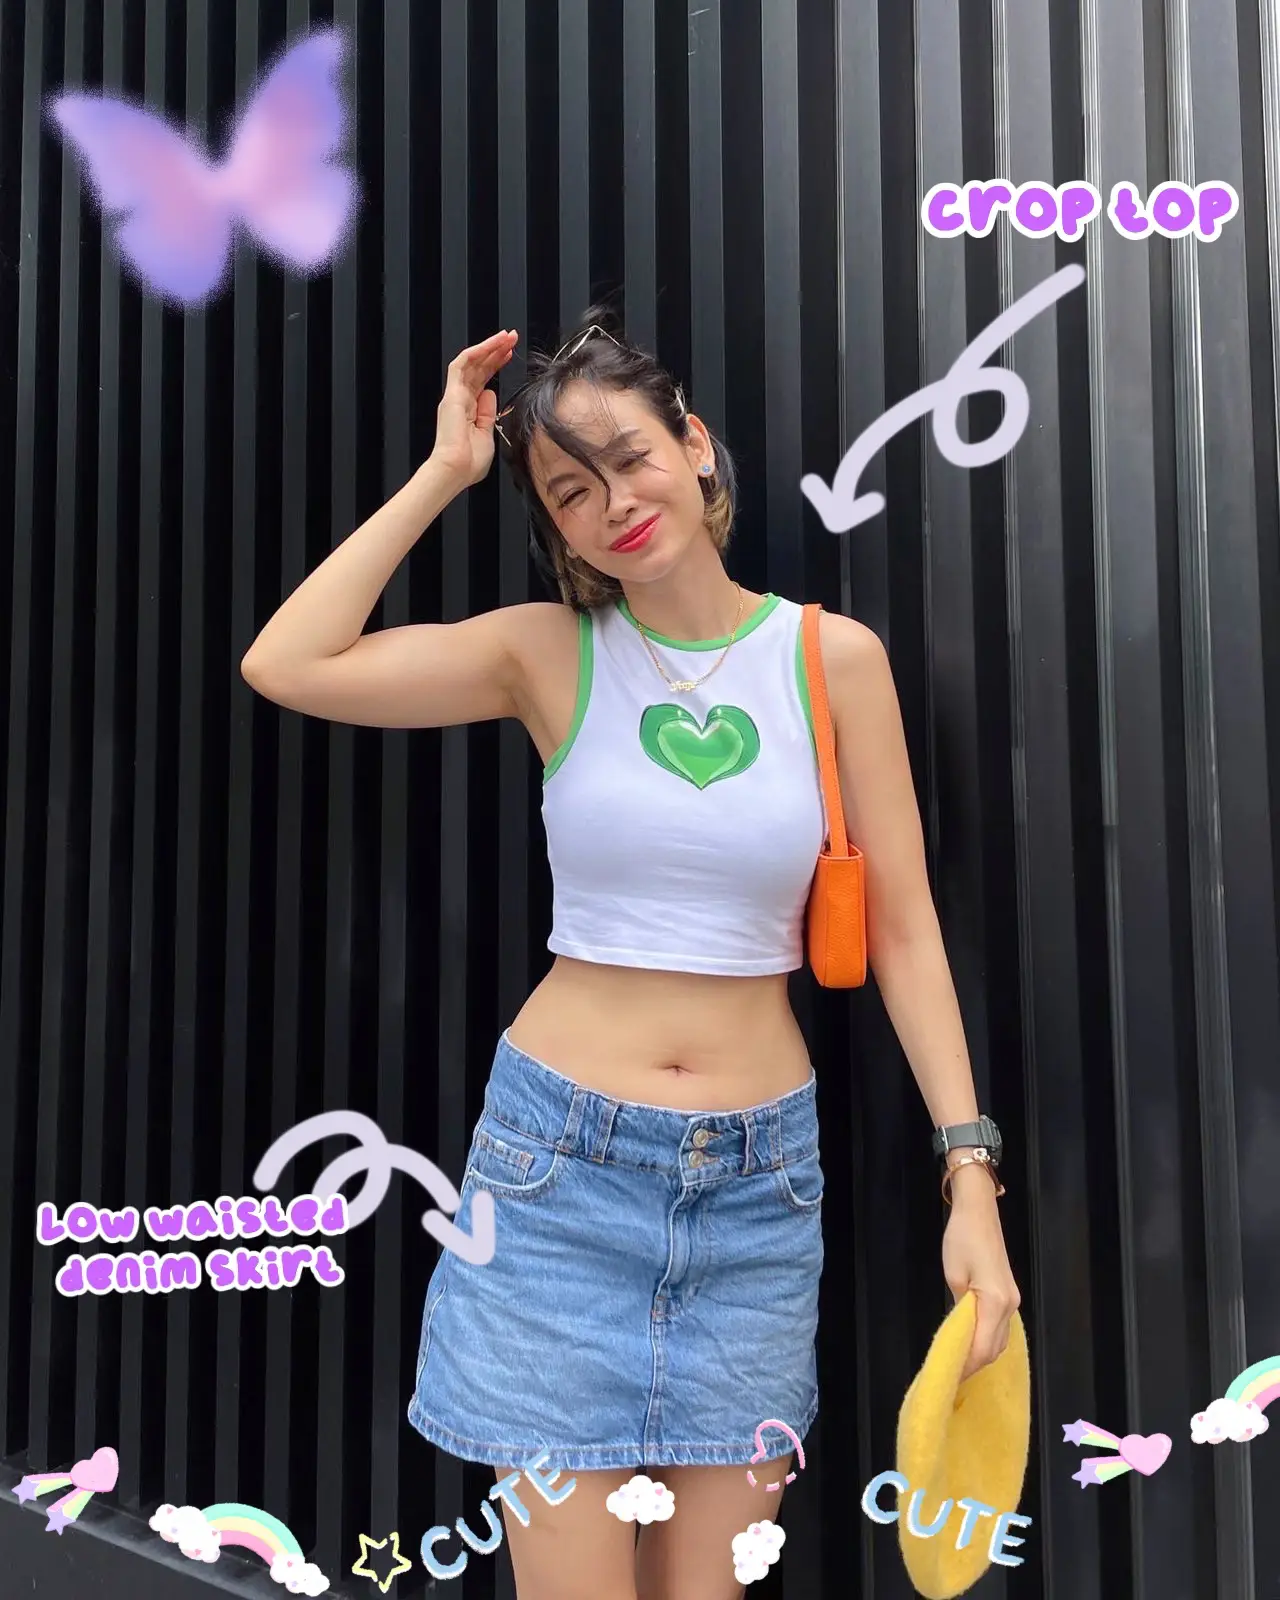 Look: 10 Y2k-inspired Aesthetic Crop Tops To Relive The Early